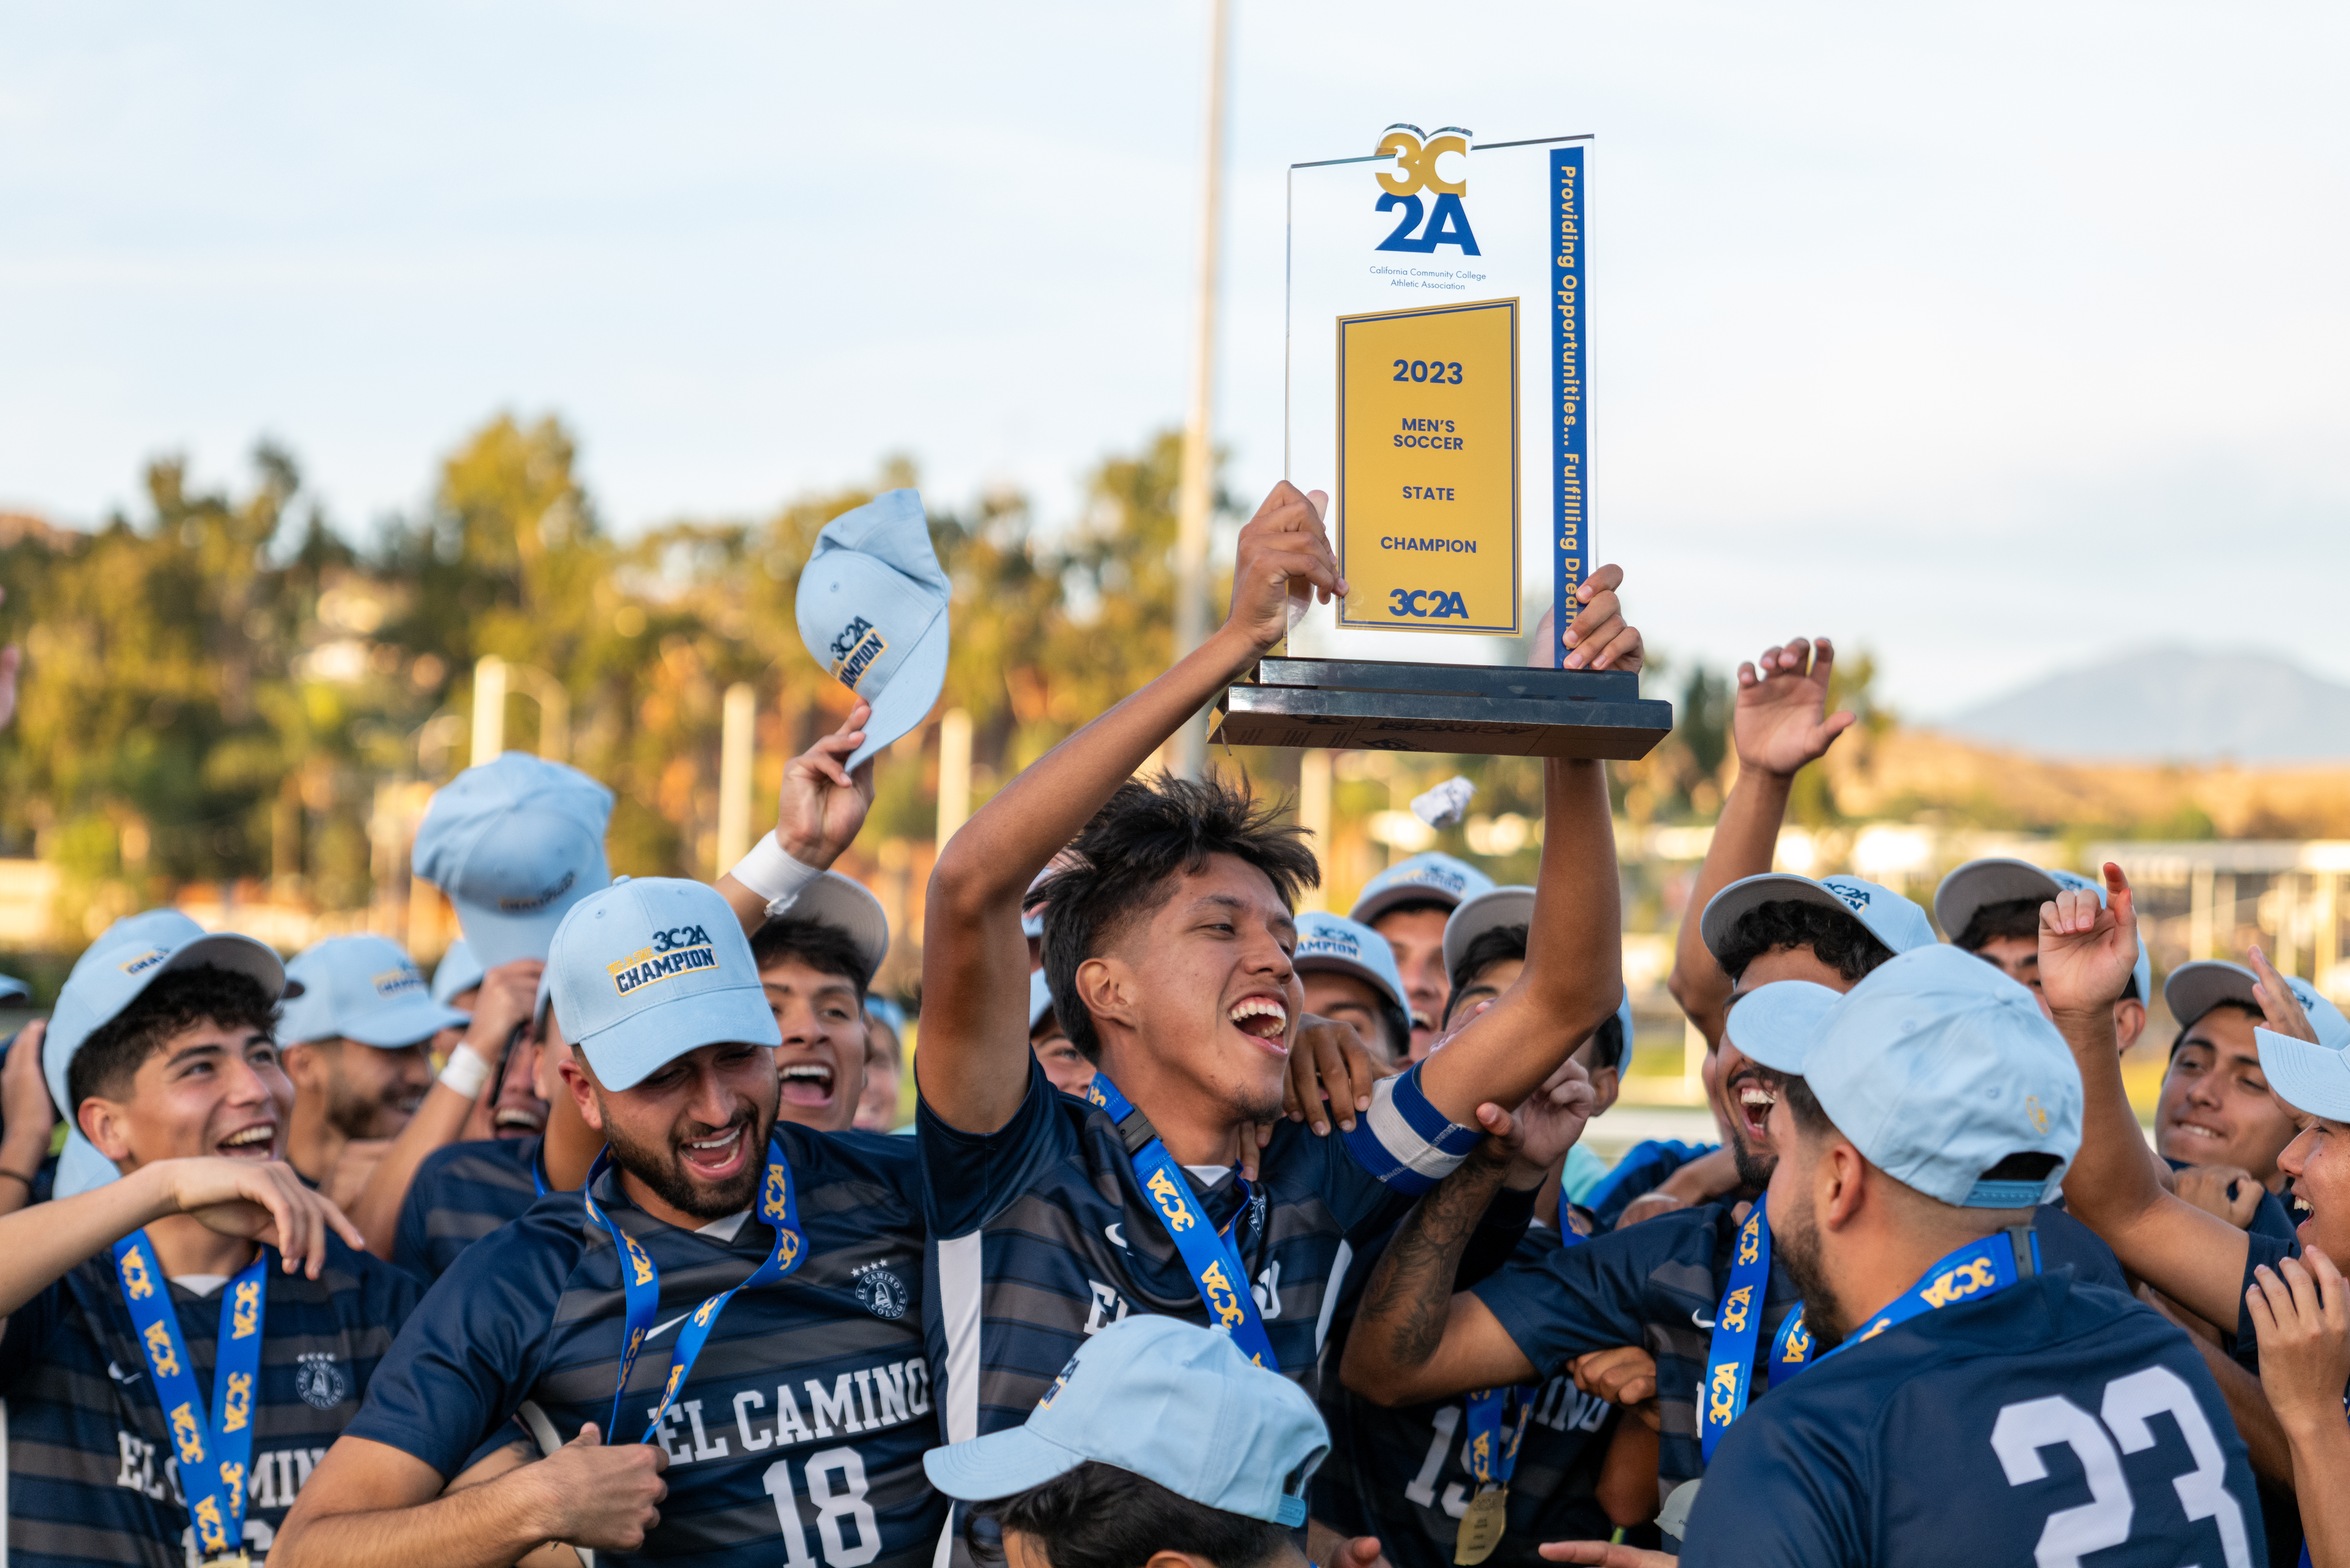 Men's Soccer Ends 31-Year Drought, Wins Fifth 3C2A State Championship